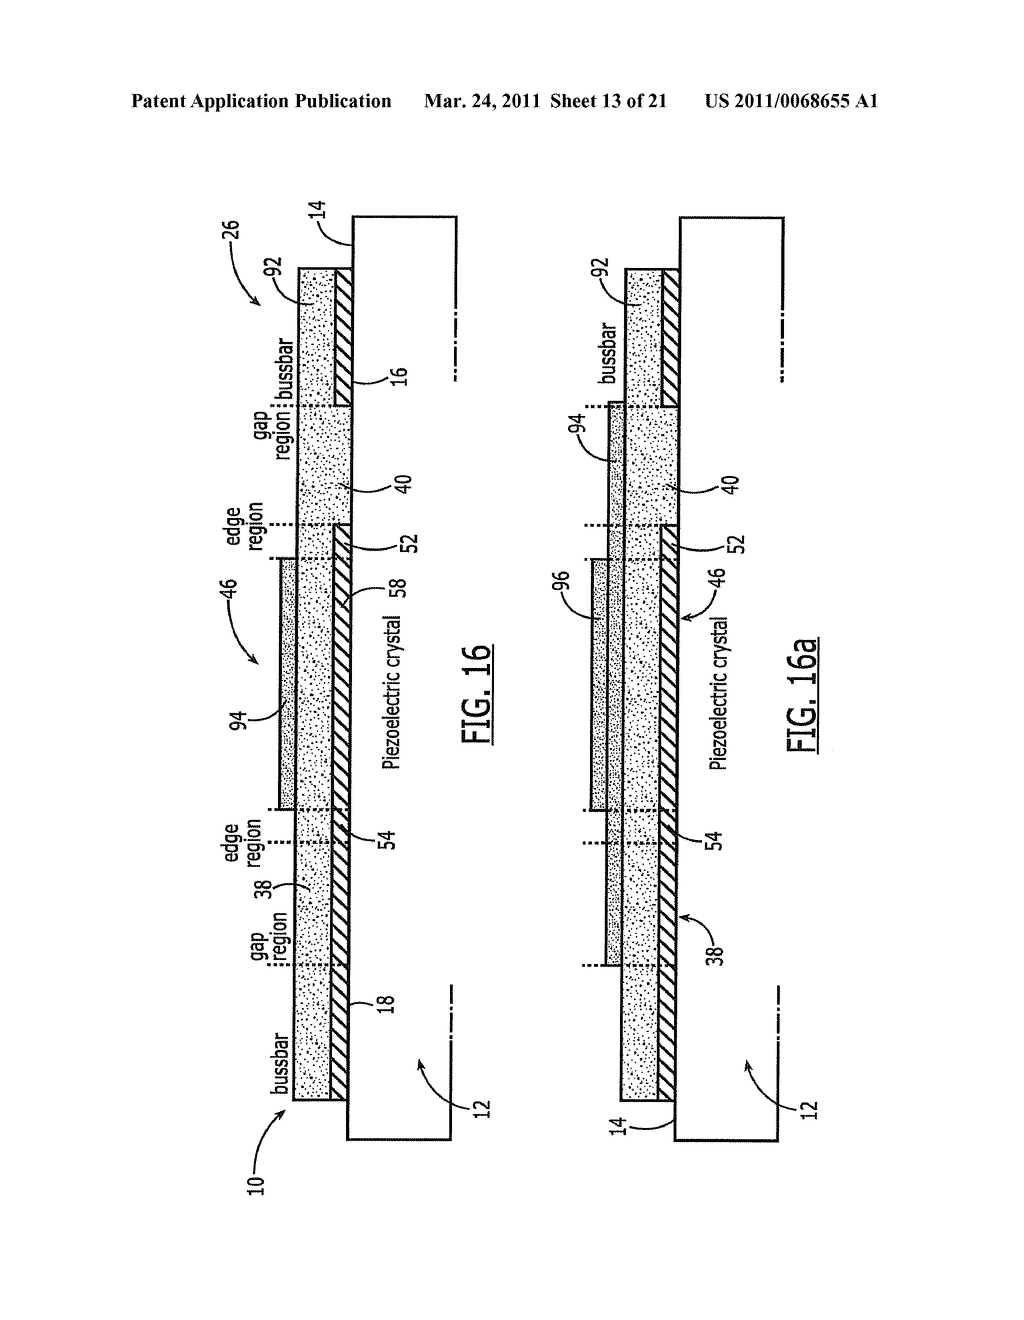 PISTON MODE ACOUSTIC WAVE DEVICE AND METHOD PROVIDING A HIGH COUPLING FACTOR - diagram, schematic, and image 14